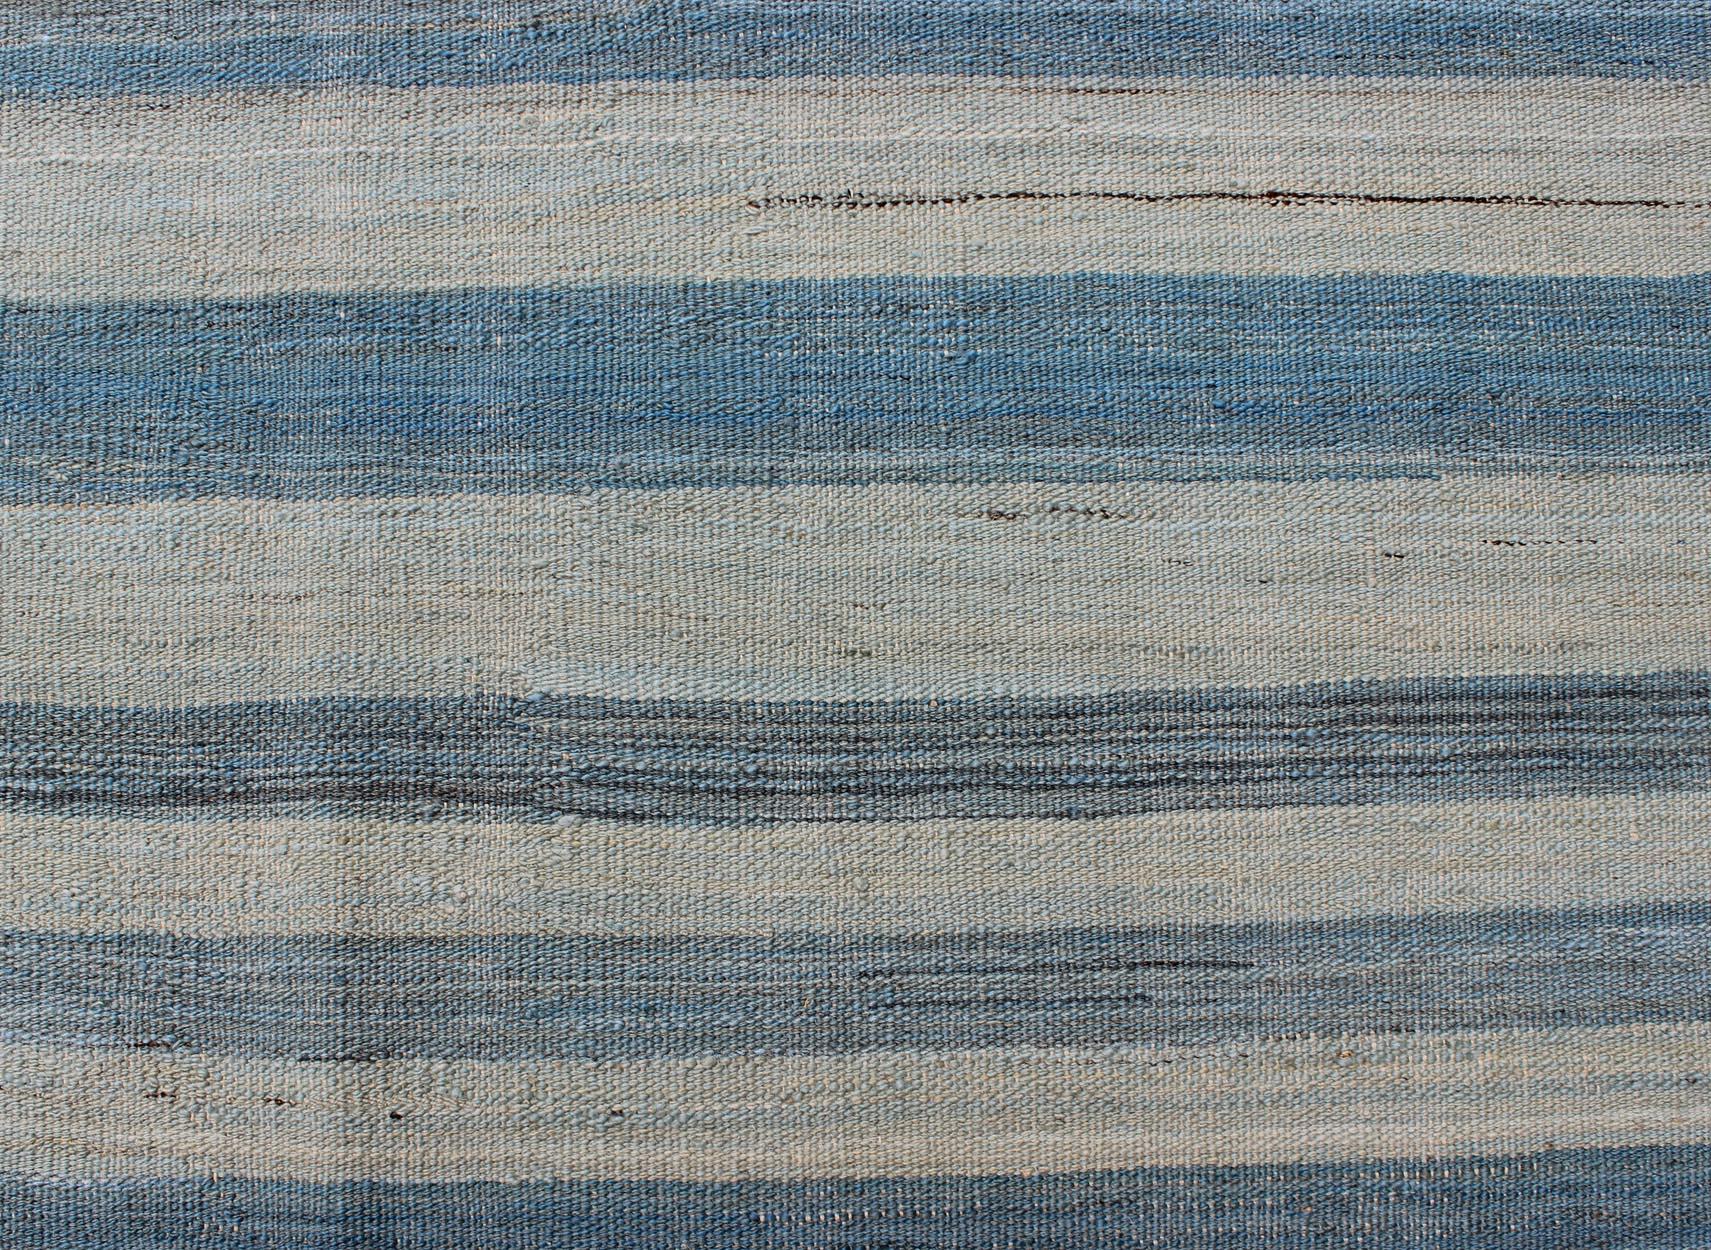 Flat-Weave Modern Kilim Rug with Stripes in Shades of Blue, Taupe Gray and Ivory 1